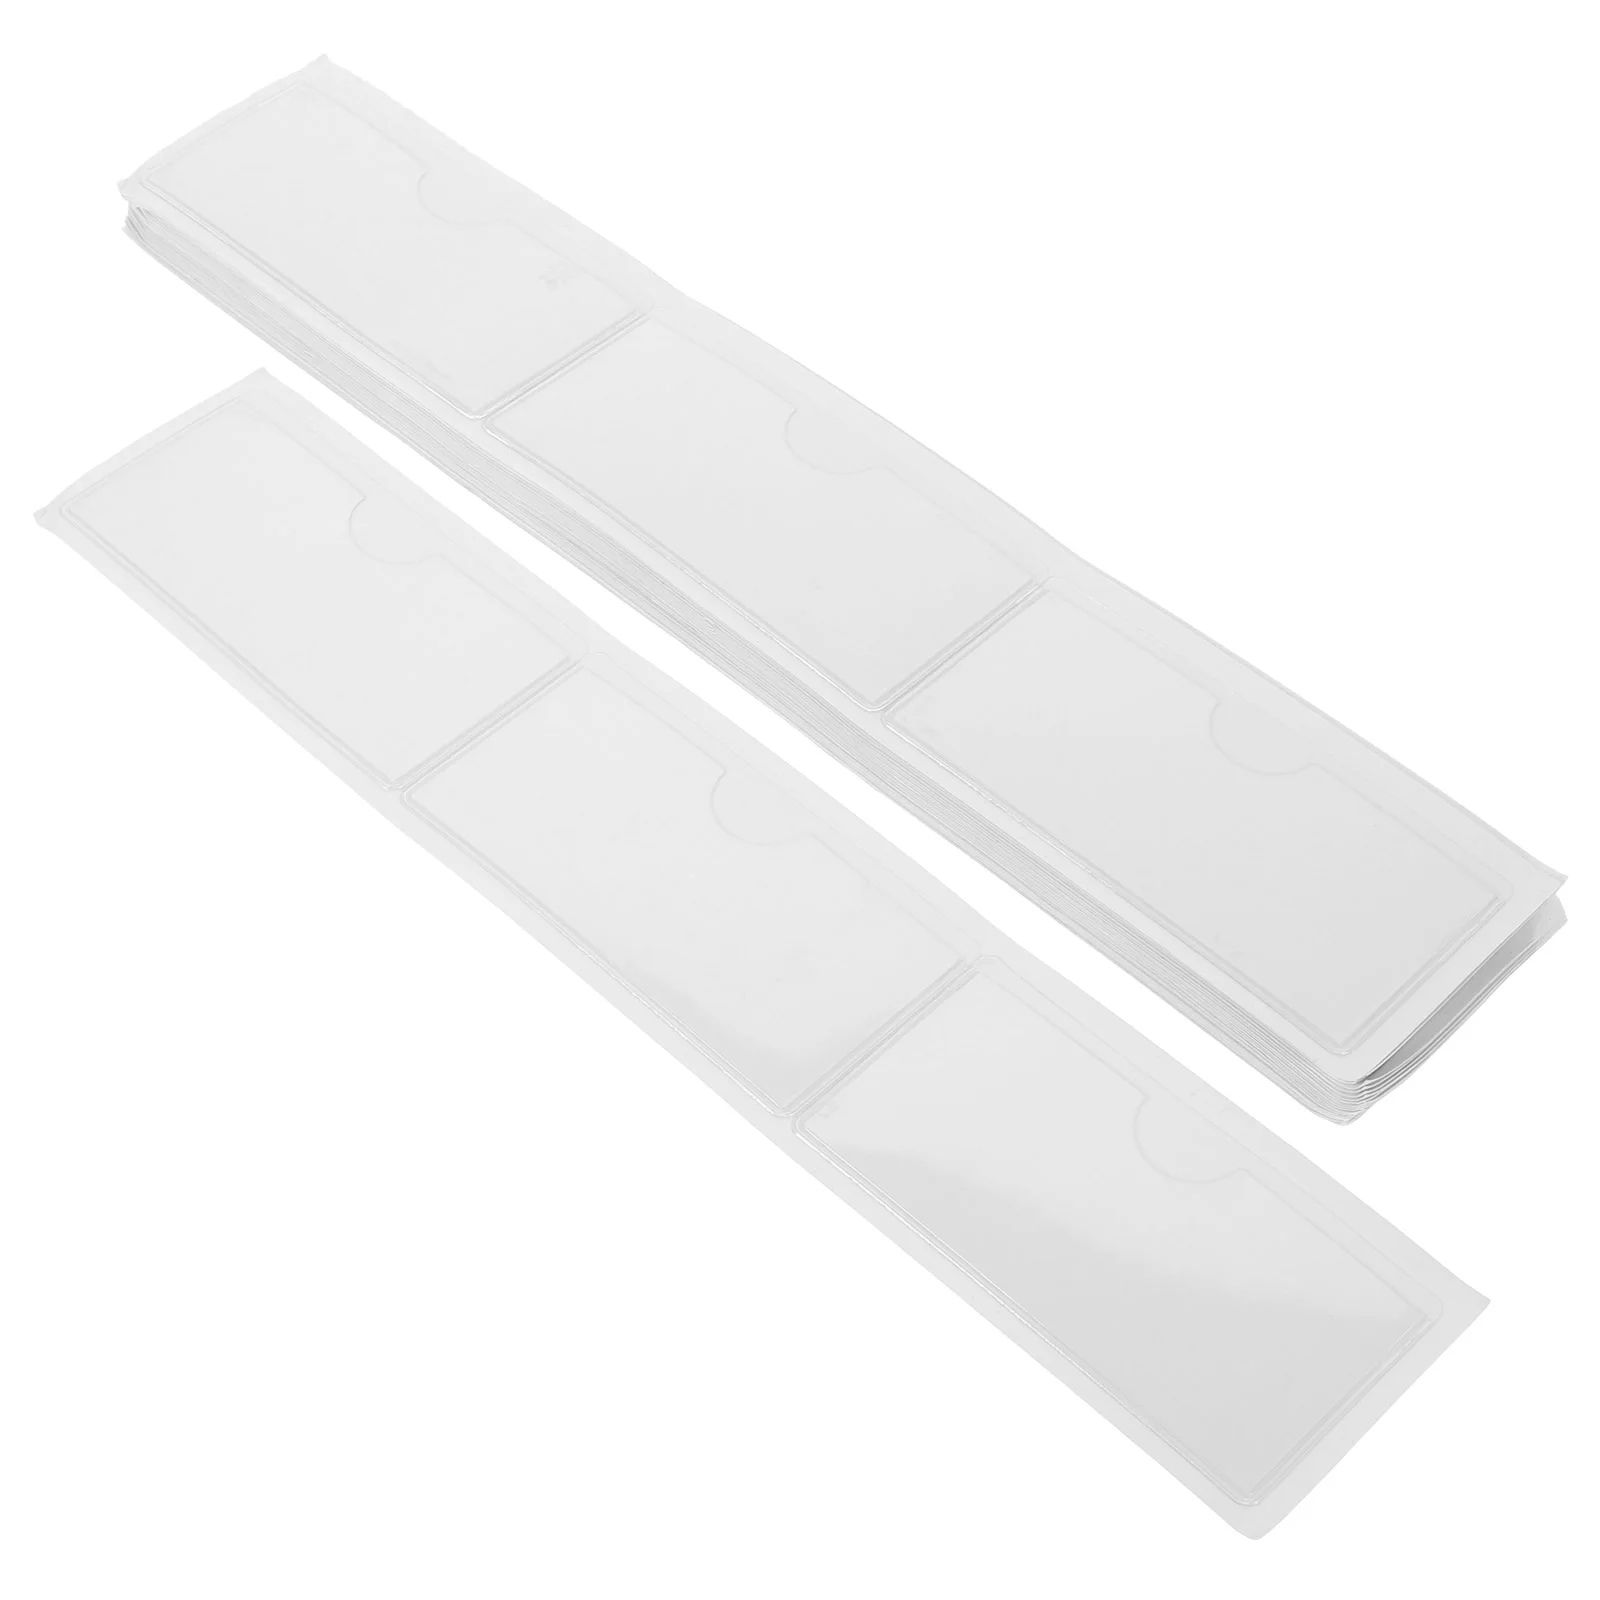 100 Pcs Label Set Plastic Card Holders Adhesive Pockets Horizontal Section Index Sleeves Pvc Protector